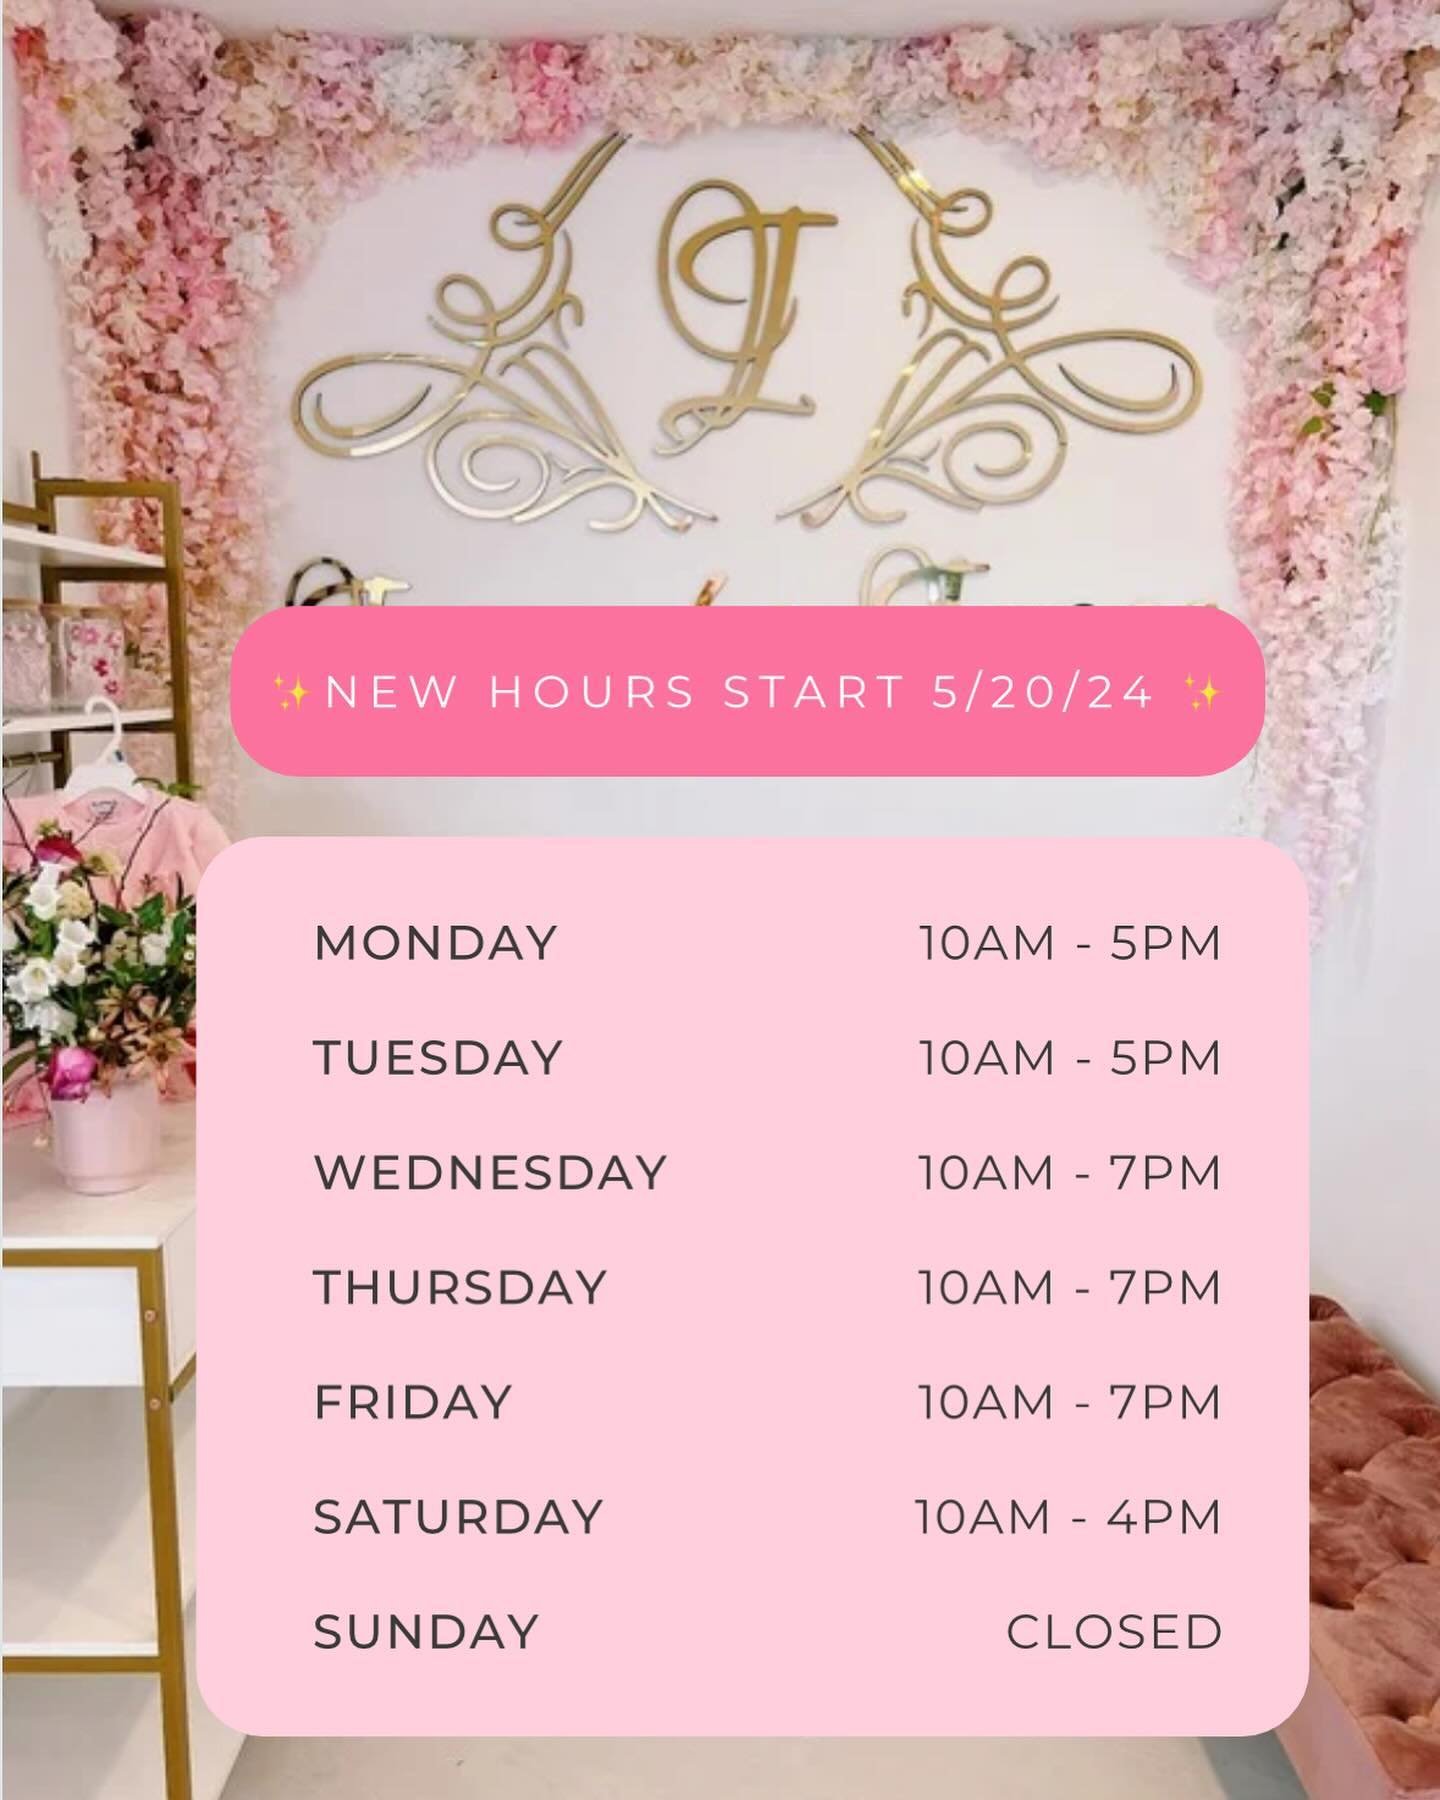 ✨OFFICIAL SUMMER HOURS✨ 

We will be starting these hours Monday, May 20th. We will open at 10am every day and be open later Wednesday-Friday!!! Please be patient with us as we get this changed on Google, Facebook, &amp; DoorDash 💖